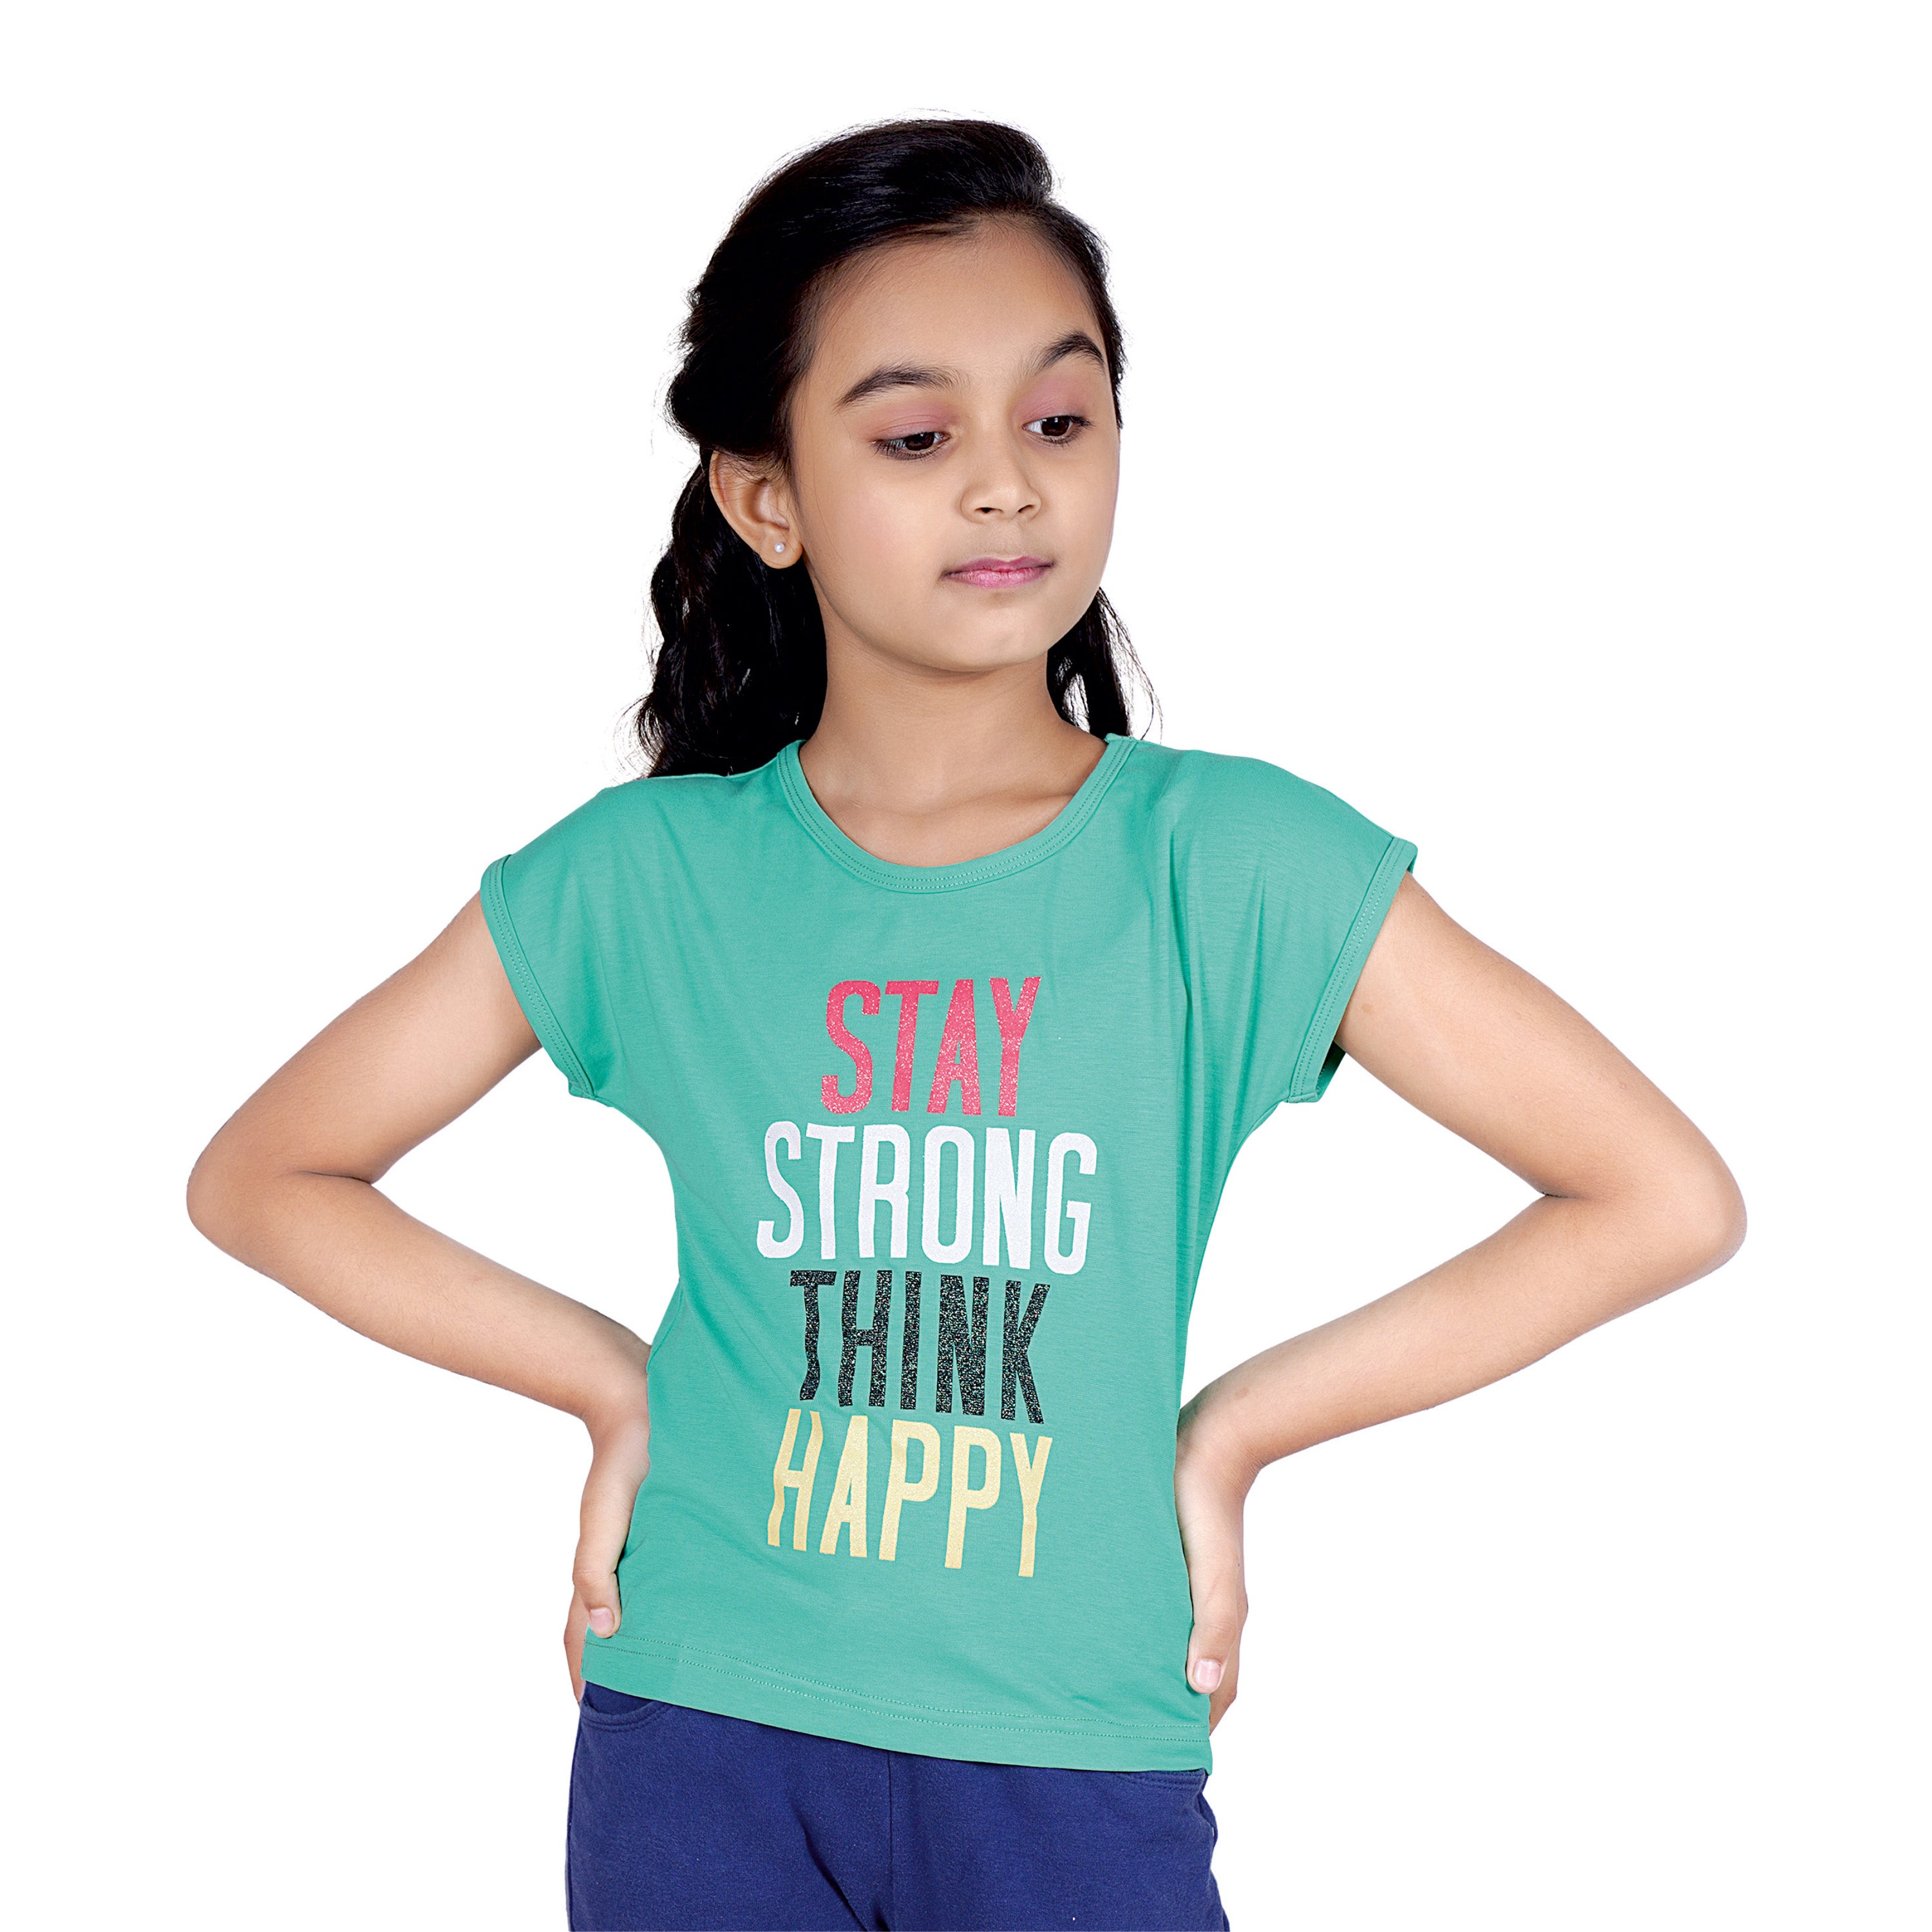 Stay Strong Think Happy T-Shirt